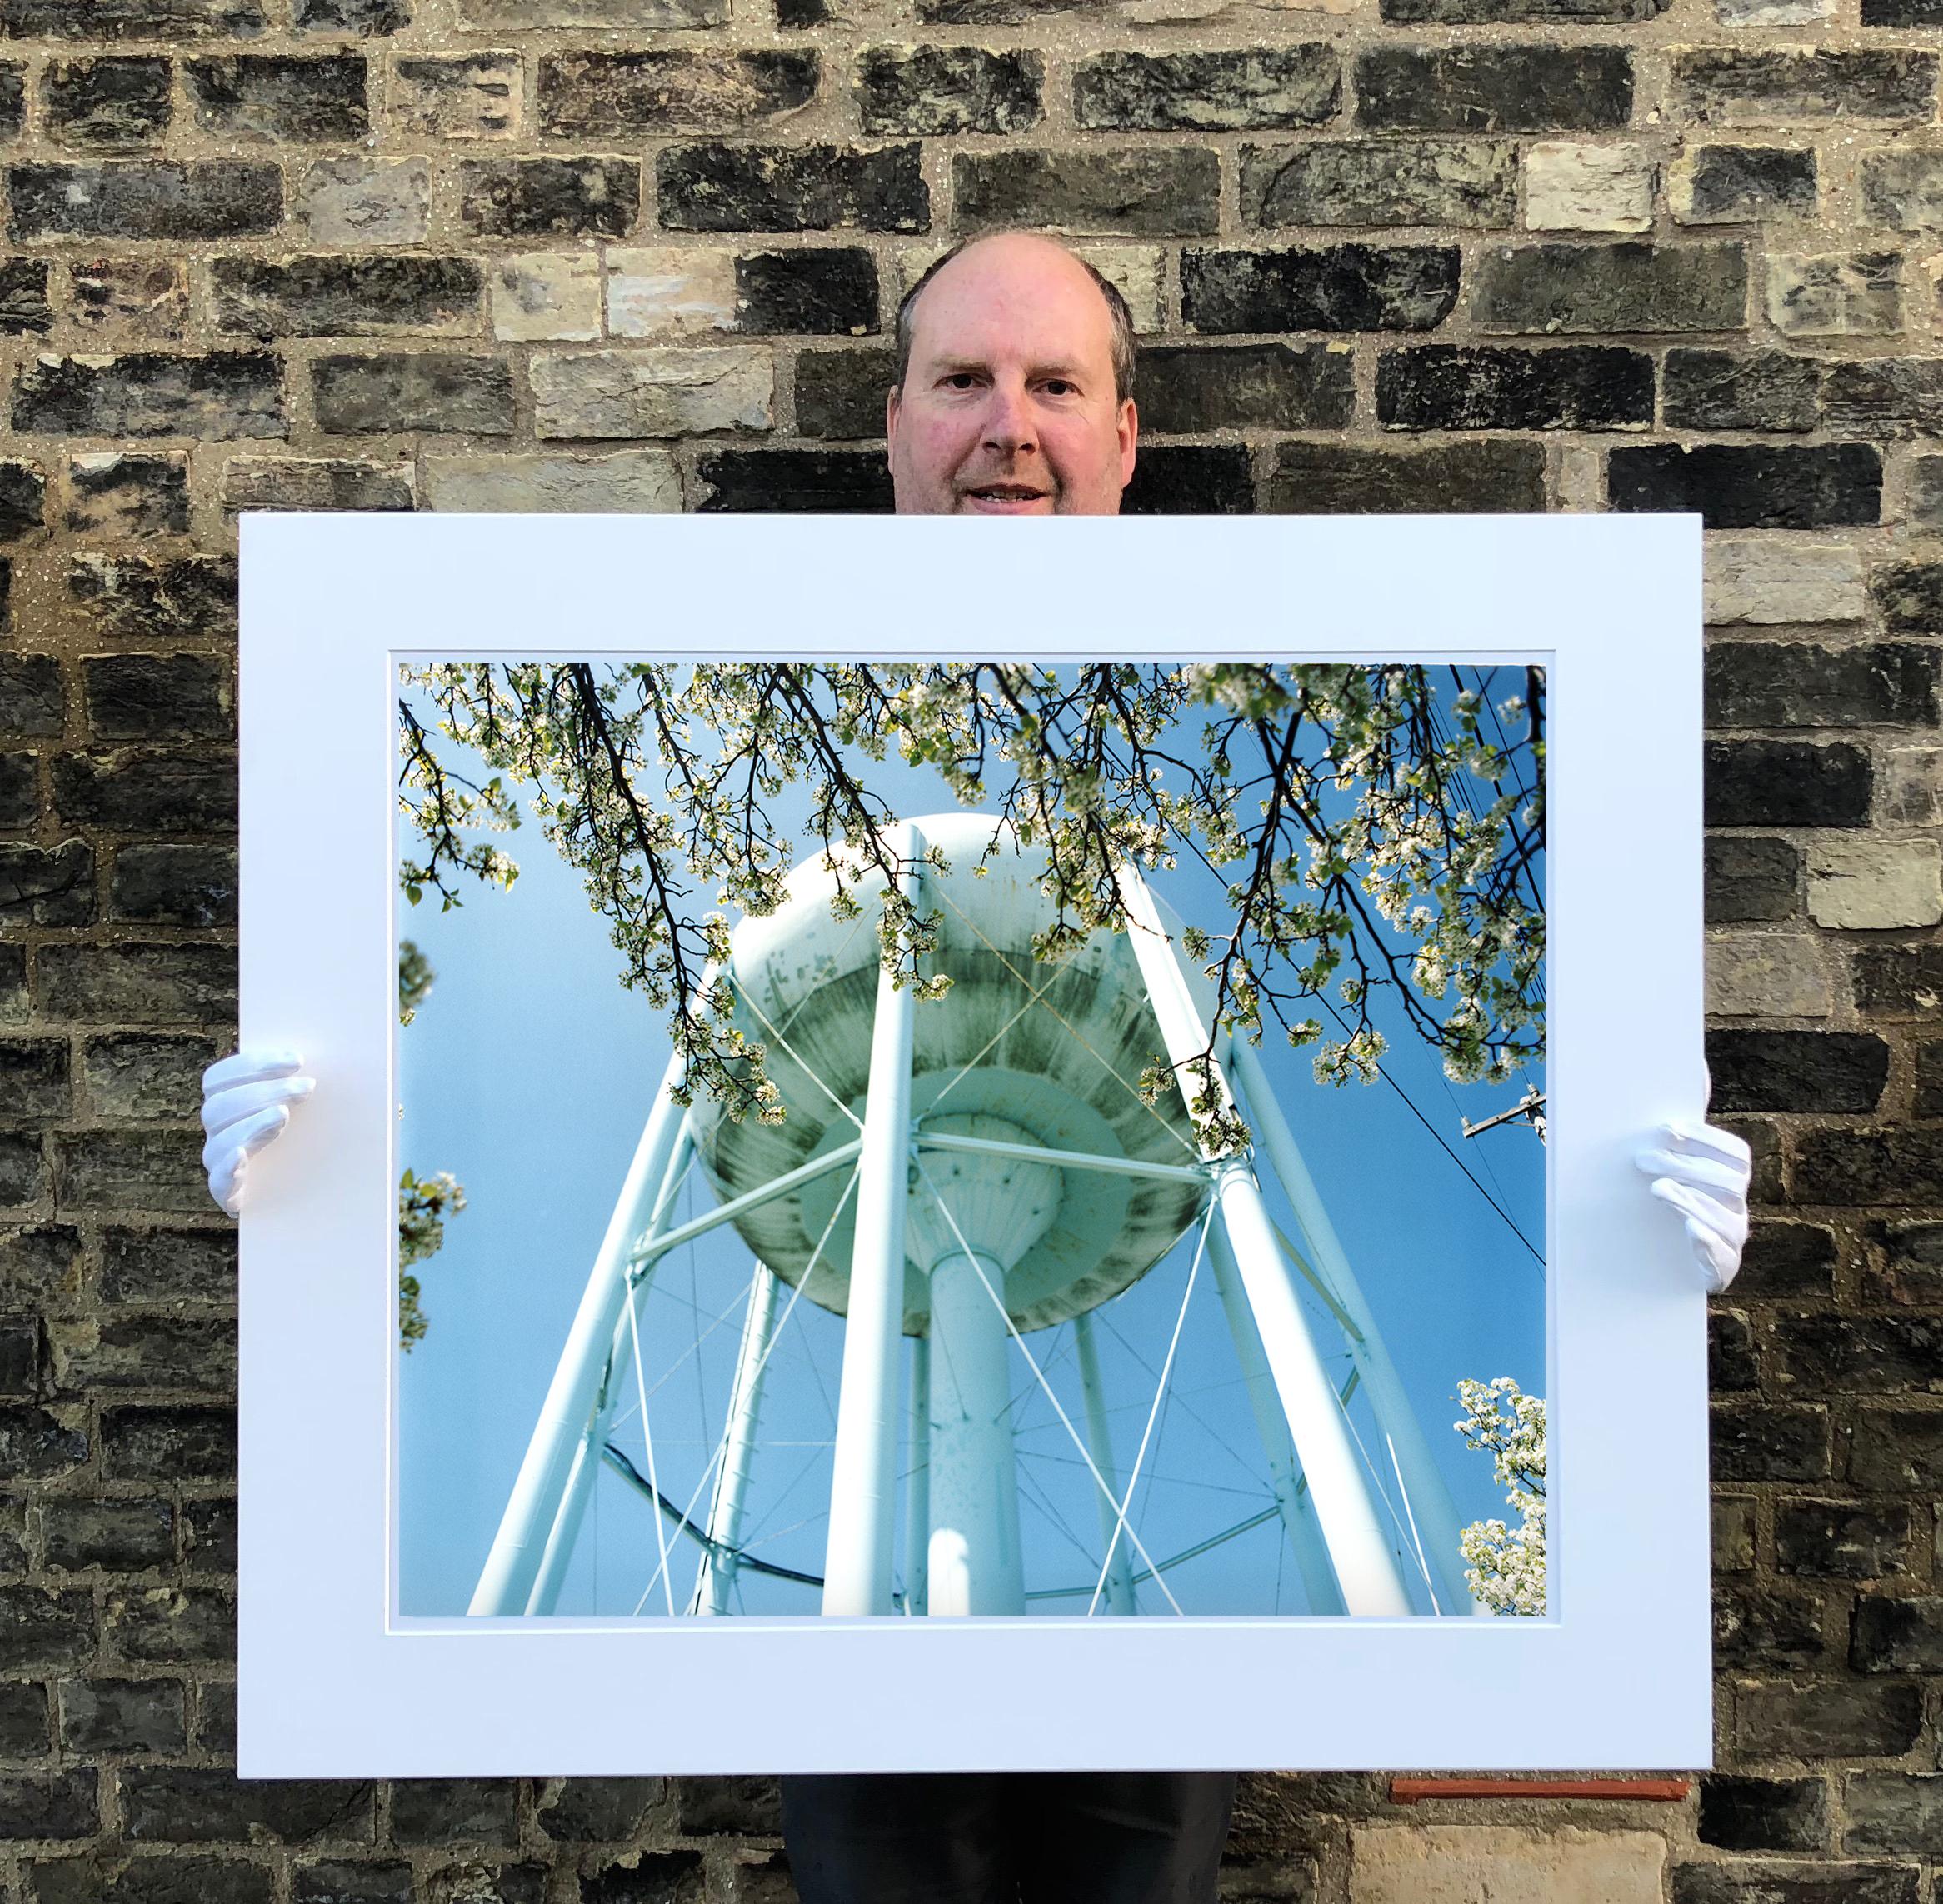 When photographing in New Jersey, Richard loved the Water Towers which loomed over the small towns, interested in the artistic variations each one had. Perhaps they are everyday to the inhabitants as a photographer it is important for him to capture